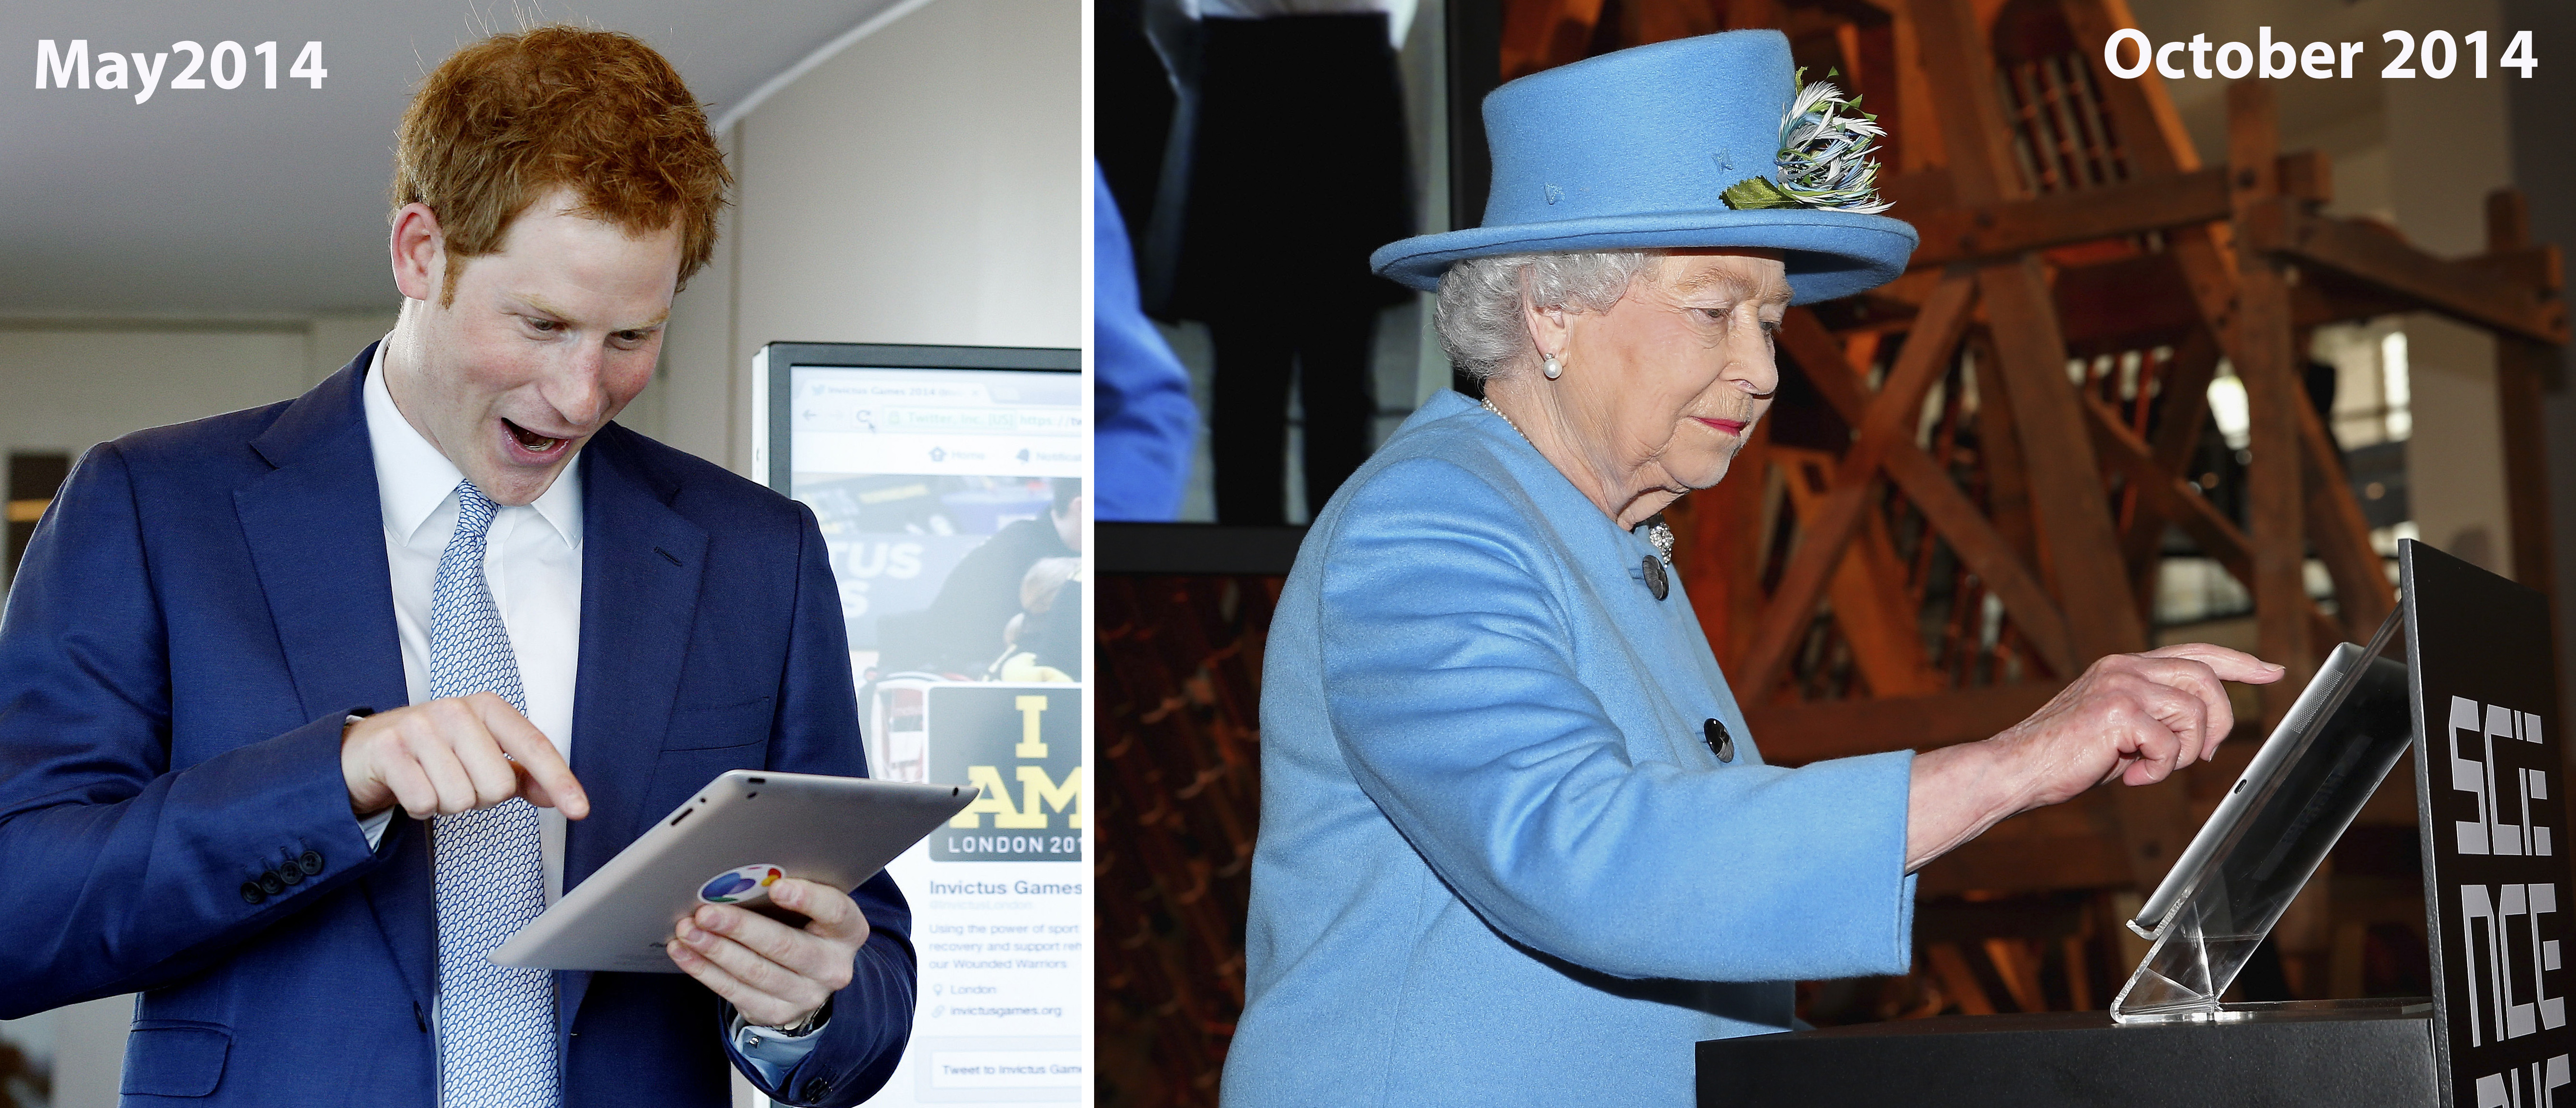 Prince Harry and the Queen both send a tweet in 2014 (Jonathan Brady/Chris Jackson/PA)